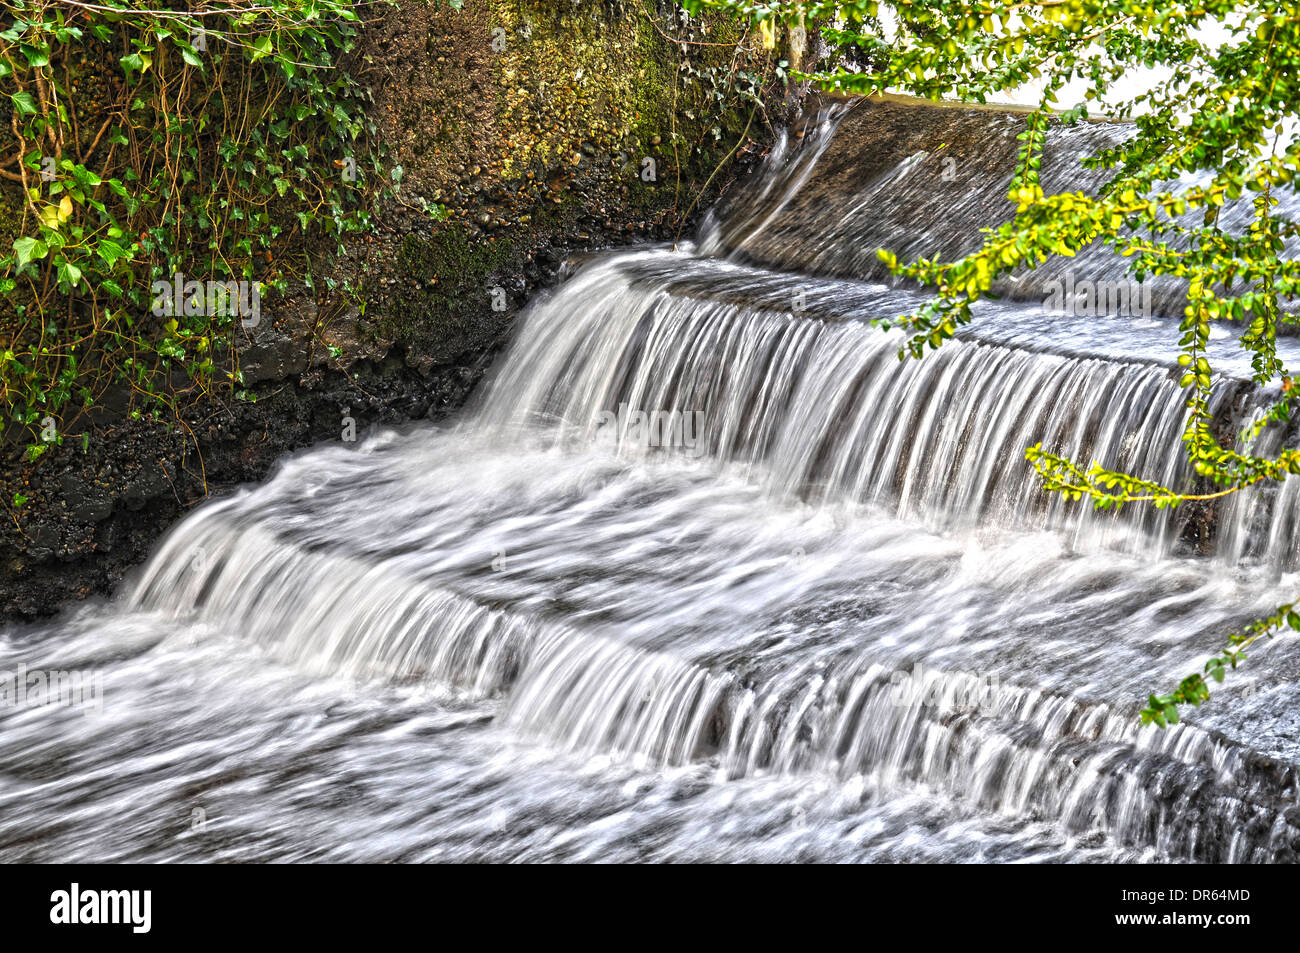 Small but fast flowing waterfall in the countryside near Brighton, England Stock Photo